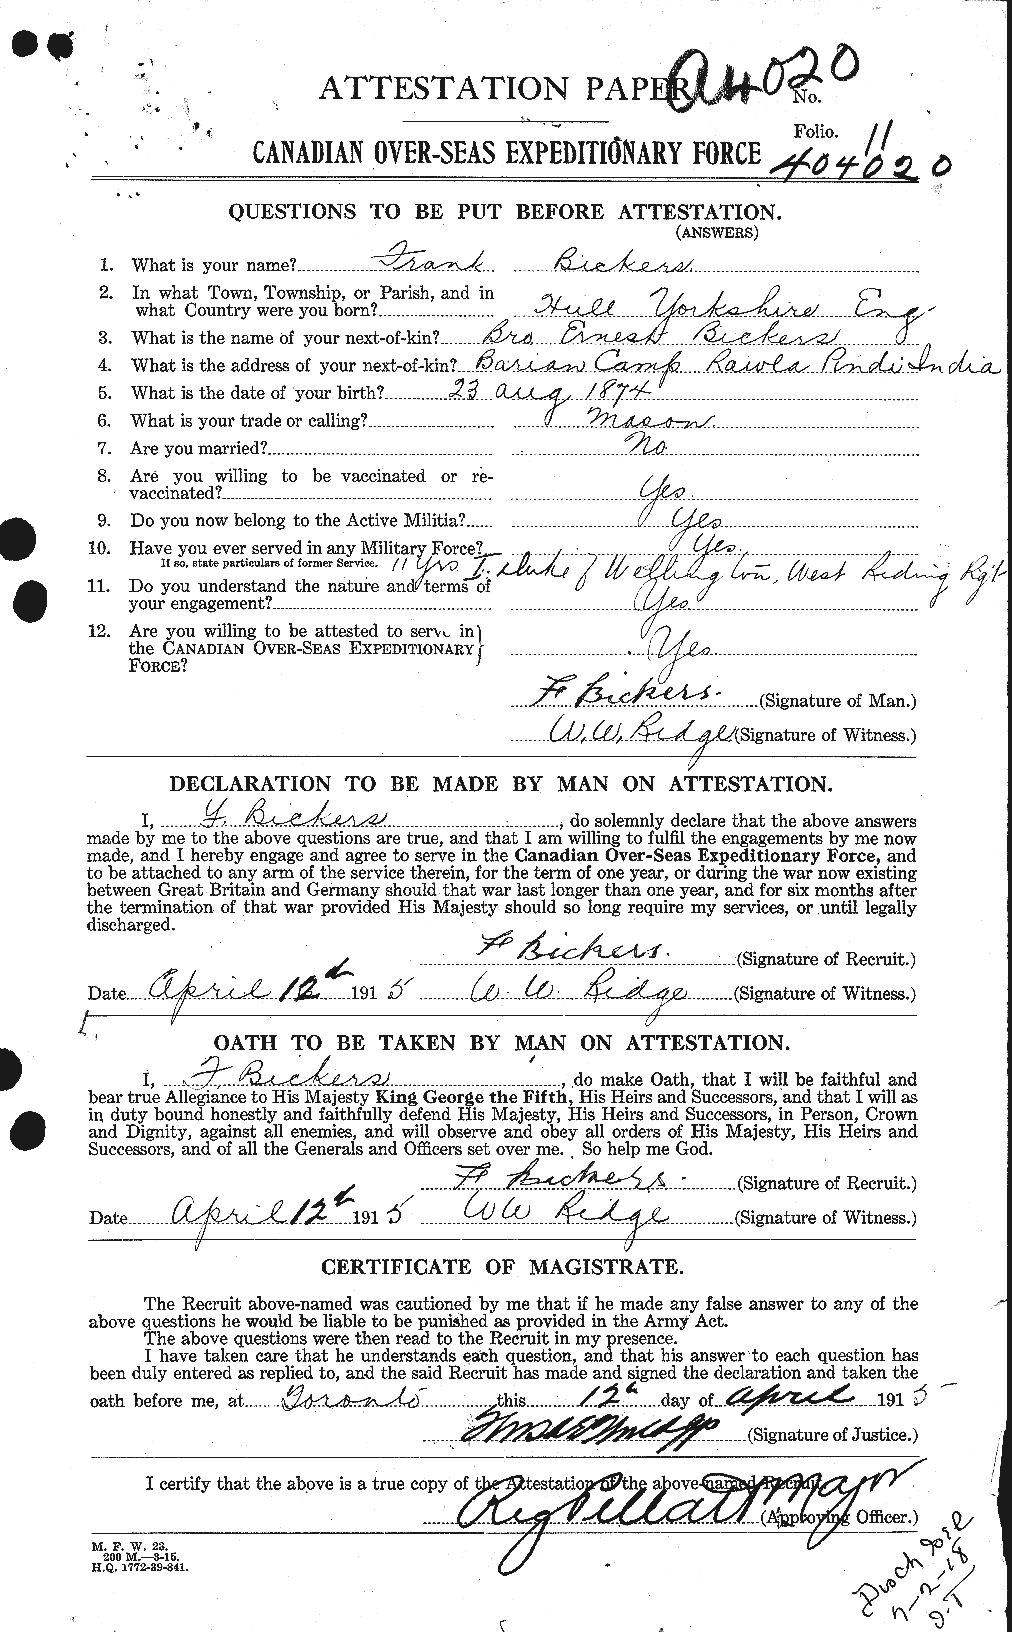 Personnel Records of the First World War - CEF 244960a